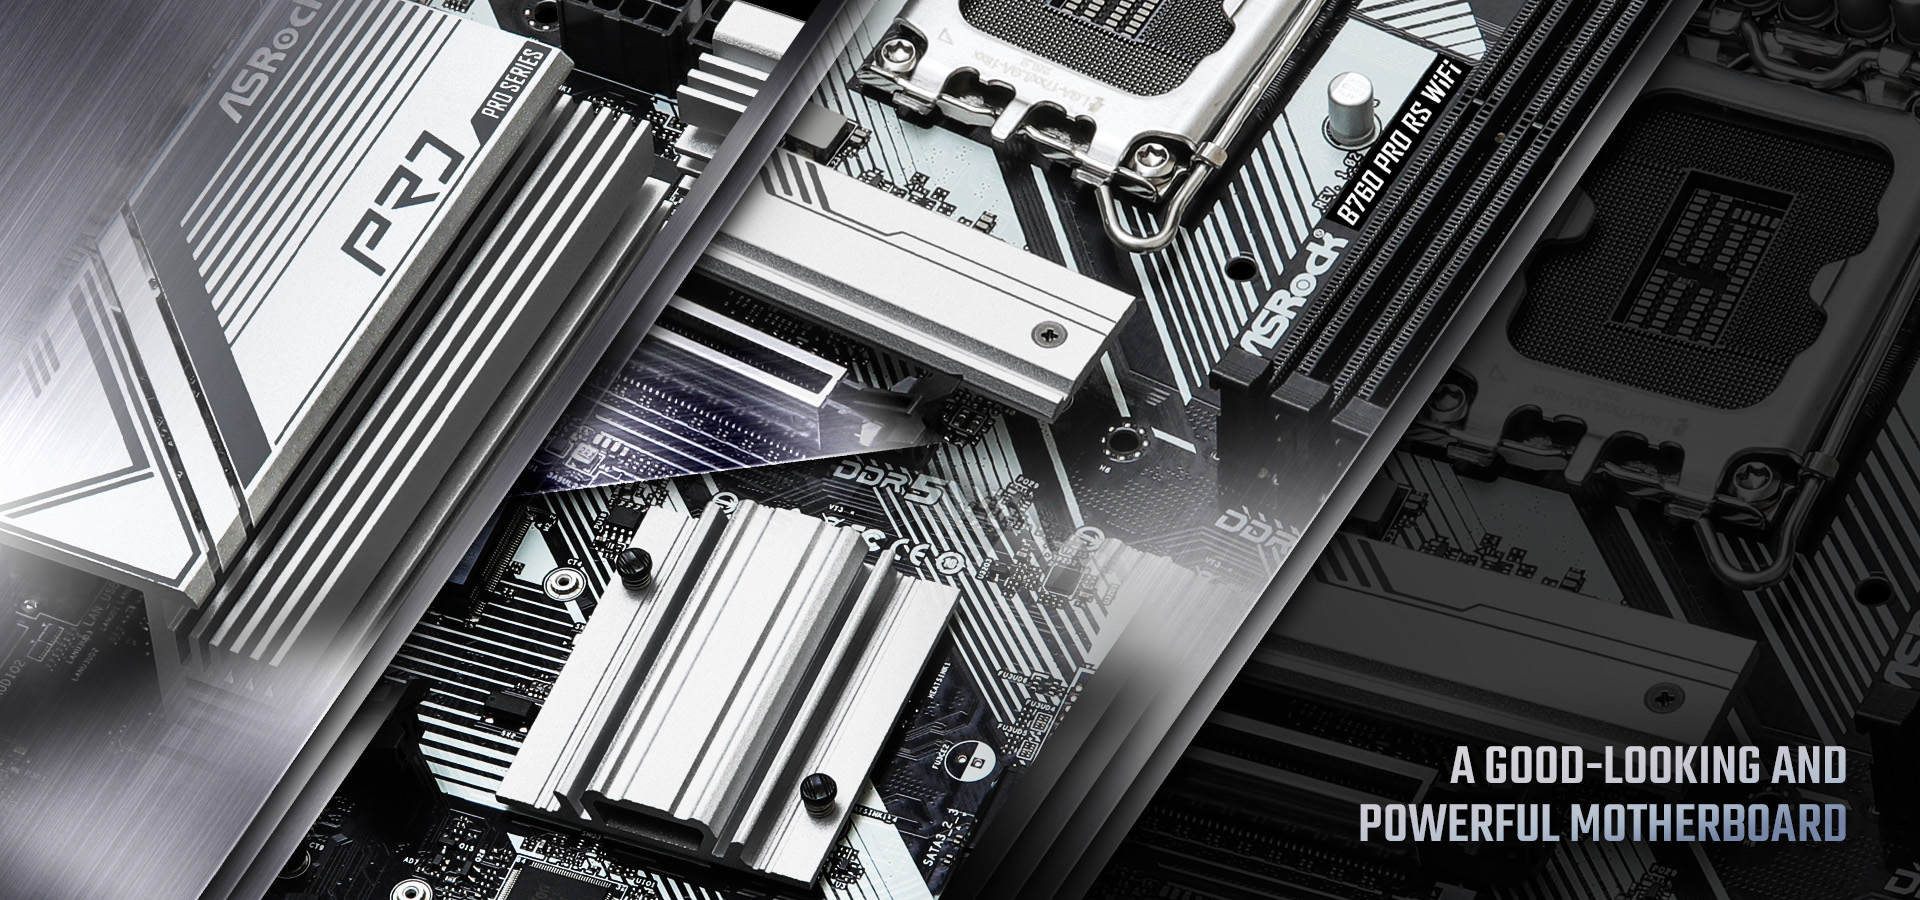 Motherboard's concept picture